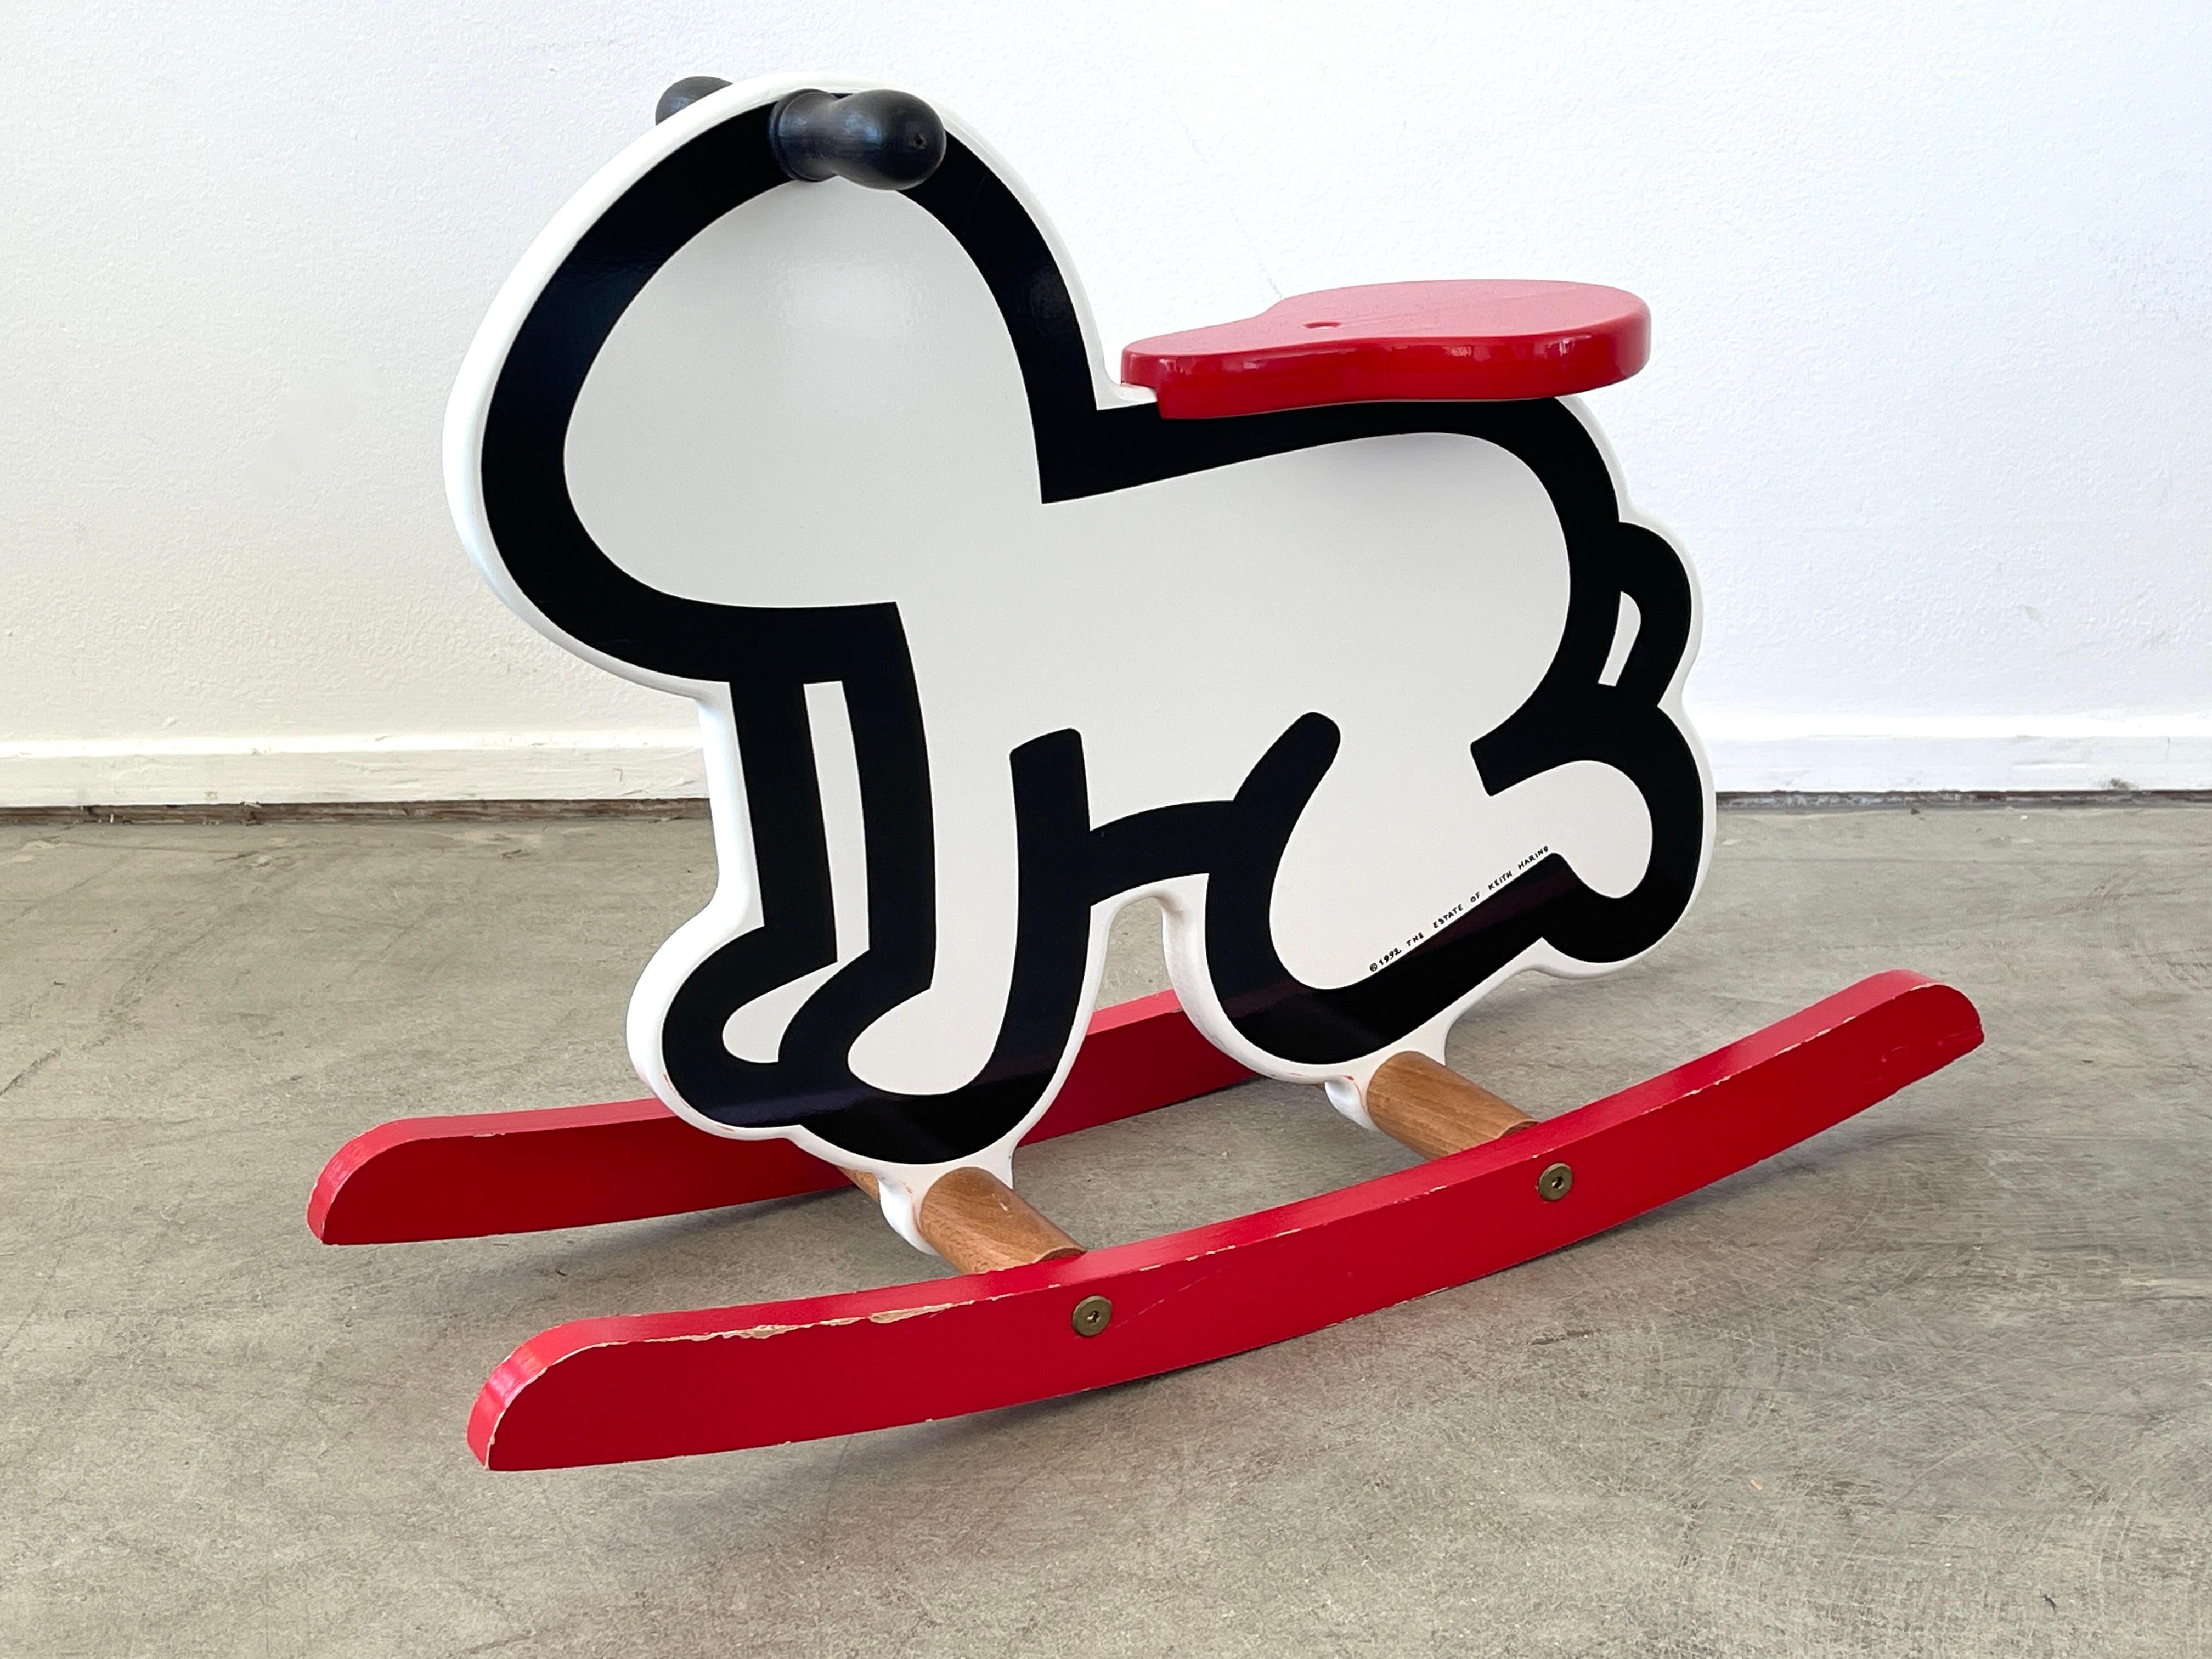 Keith Haring Children's rocker Pop Art horse chair Toy 1992. 
Child's rocker in wood painted black, white, and red, with signature Haring's iconic human form design as the rocking horse. 
Estate stamped 